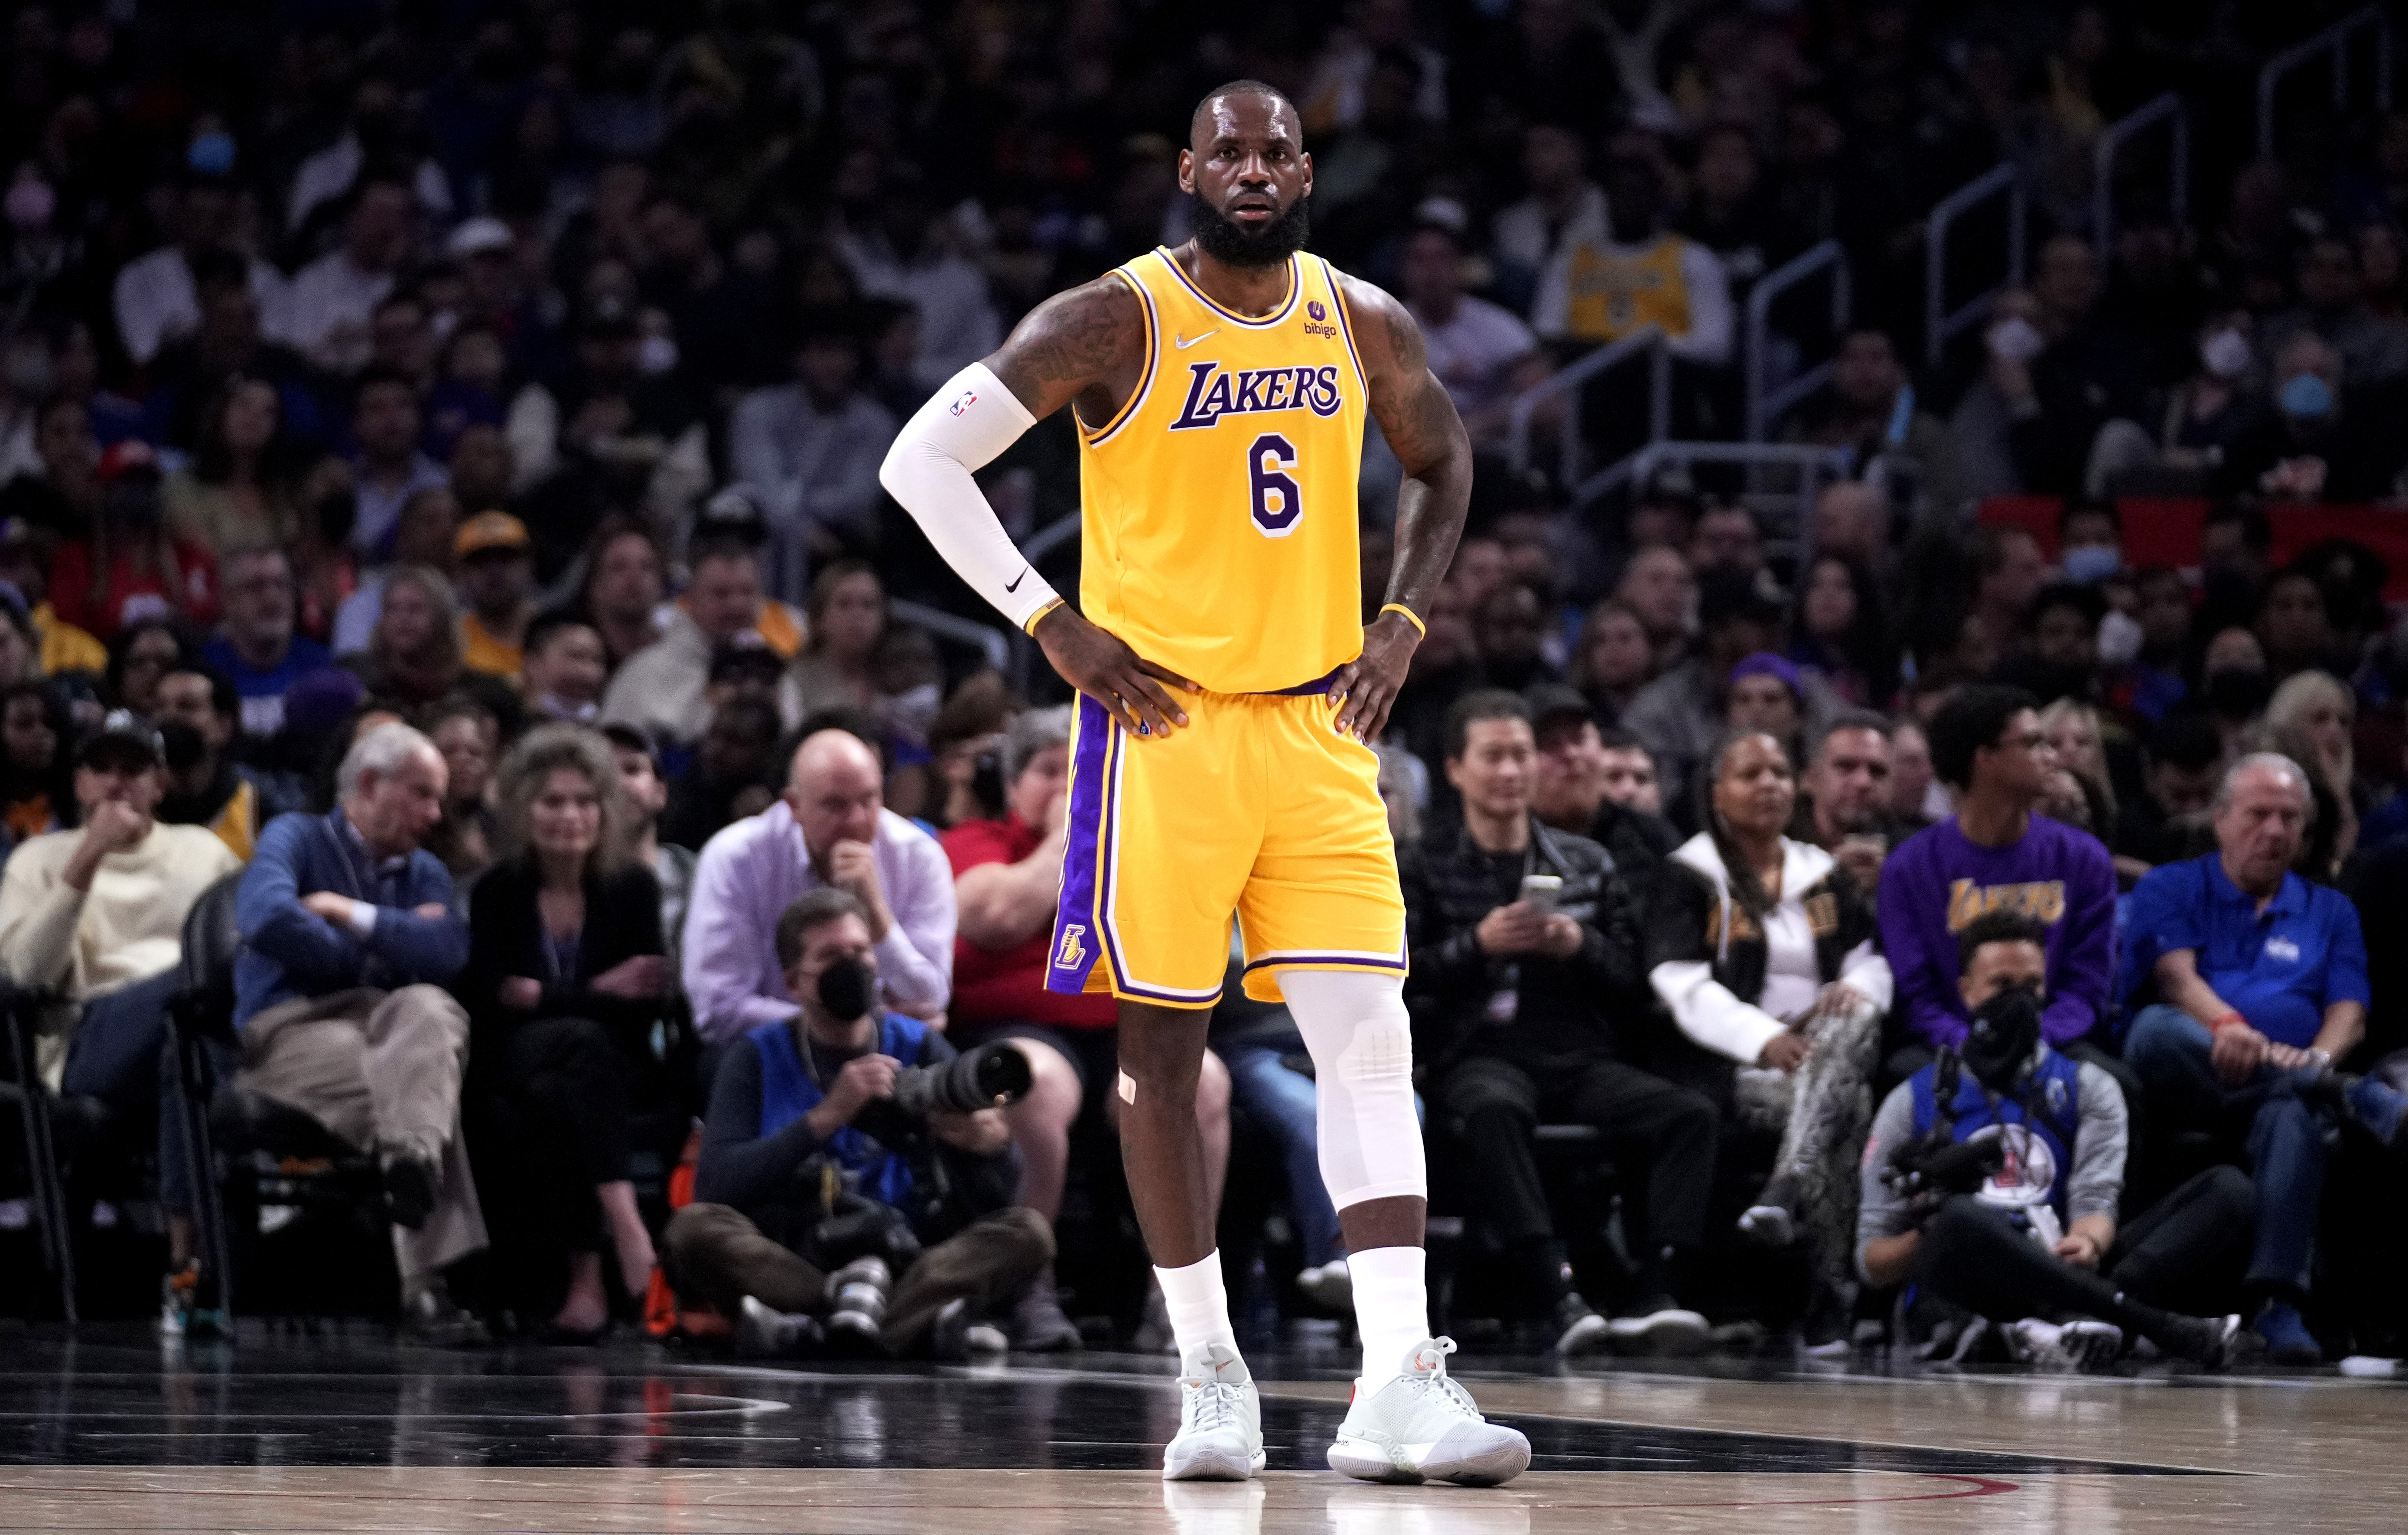 Los Angeles Lakers forward LeBron James waits for play to resume during a game agianst the Los Angeles Clippers.